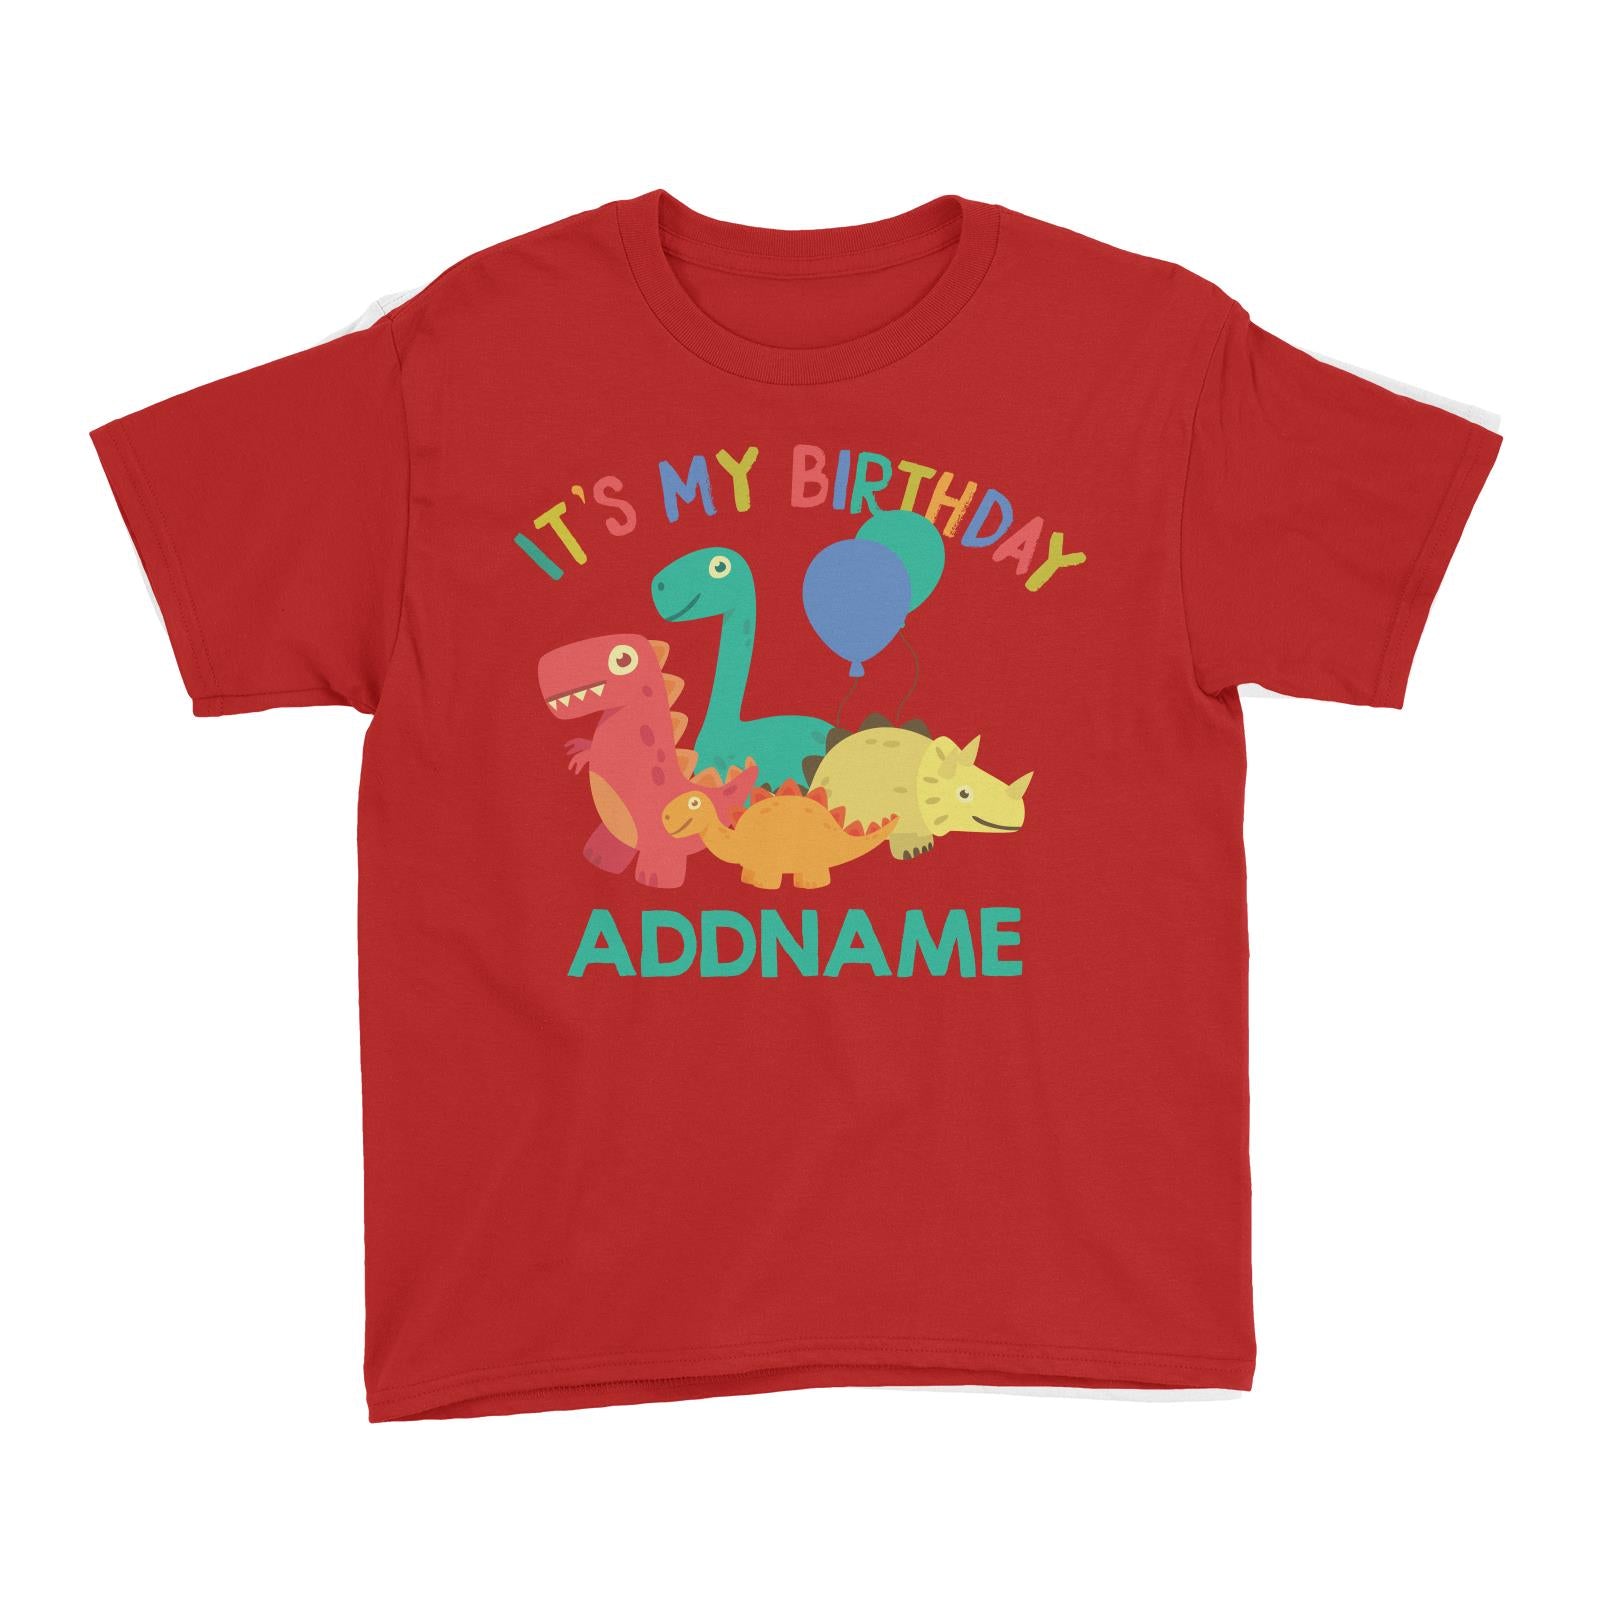 It's My Birthday Addname with Cute Dinosaurs and Balloons Birthday Theme Kid's T-Shirt